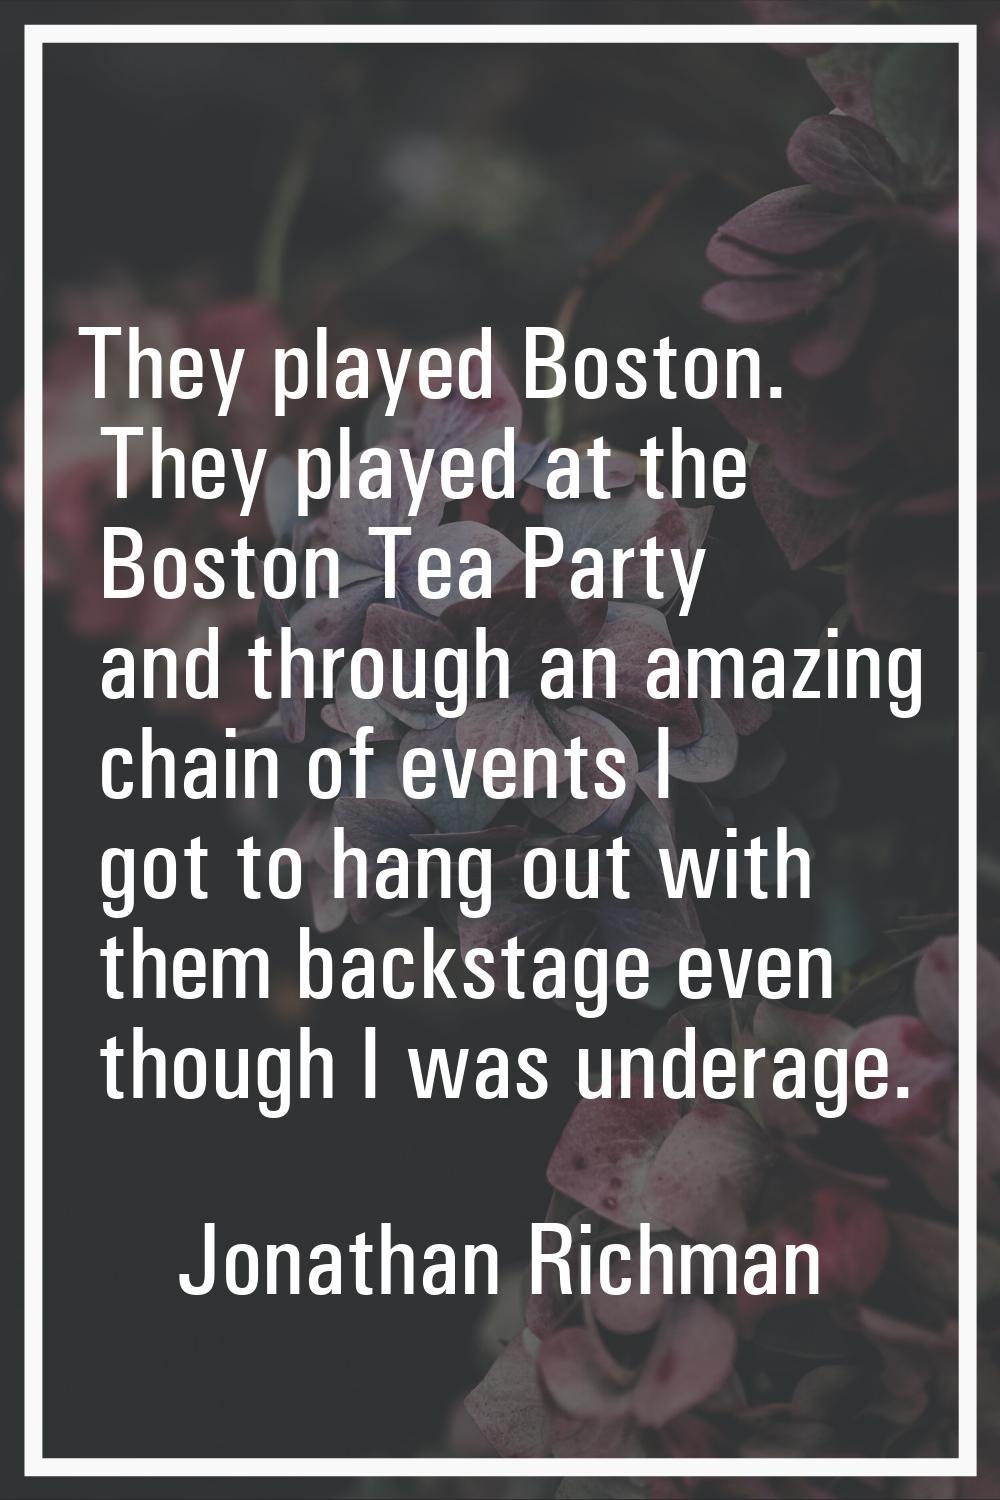 They played Boston. They played at the Boston Tea Party and through an amazing chain of events I go